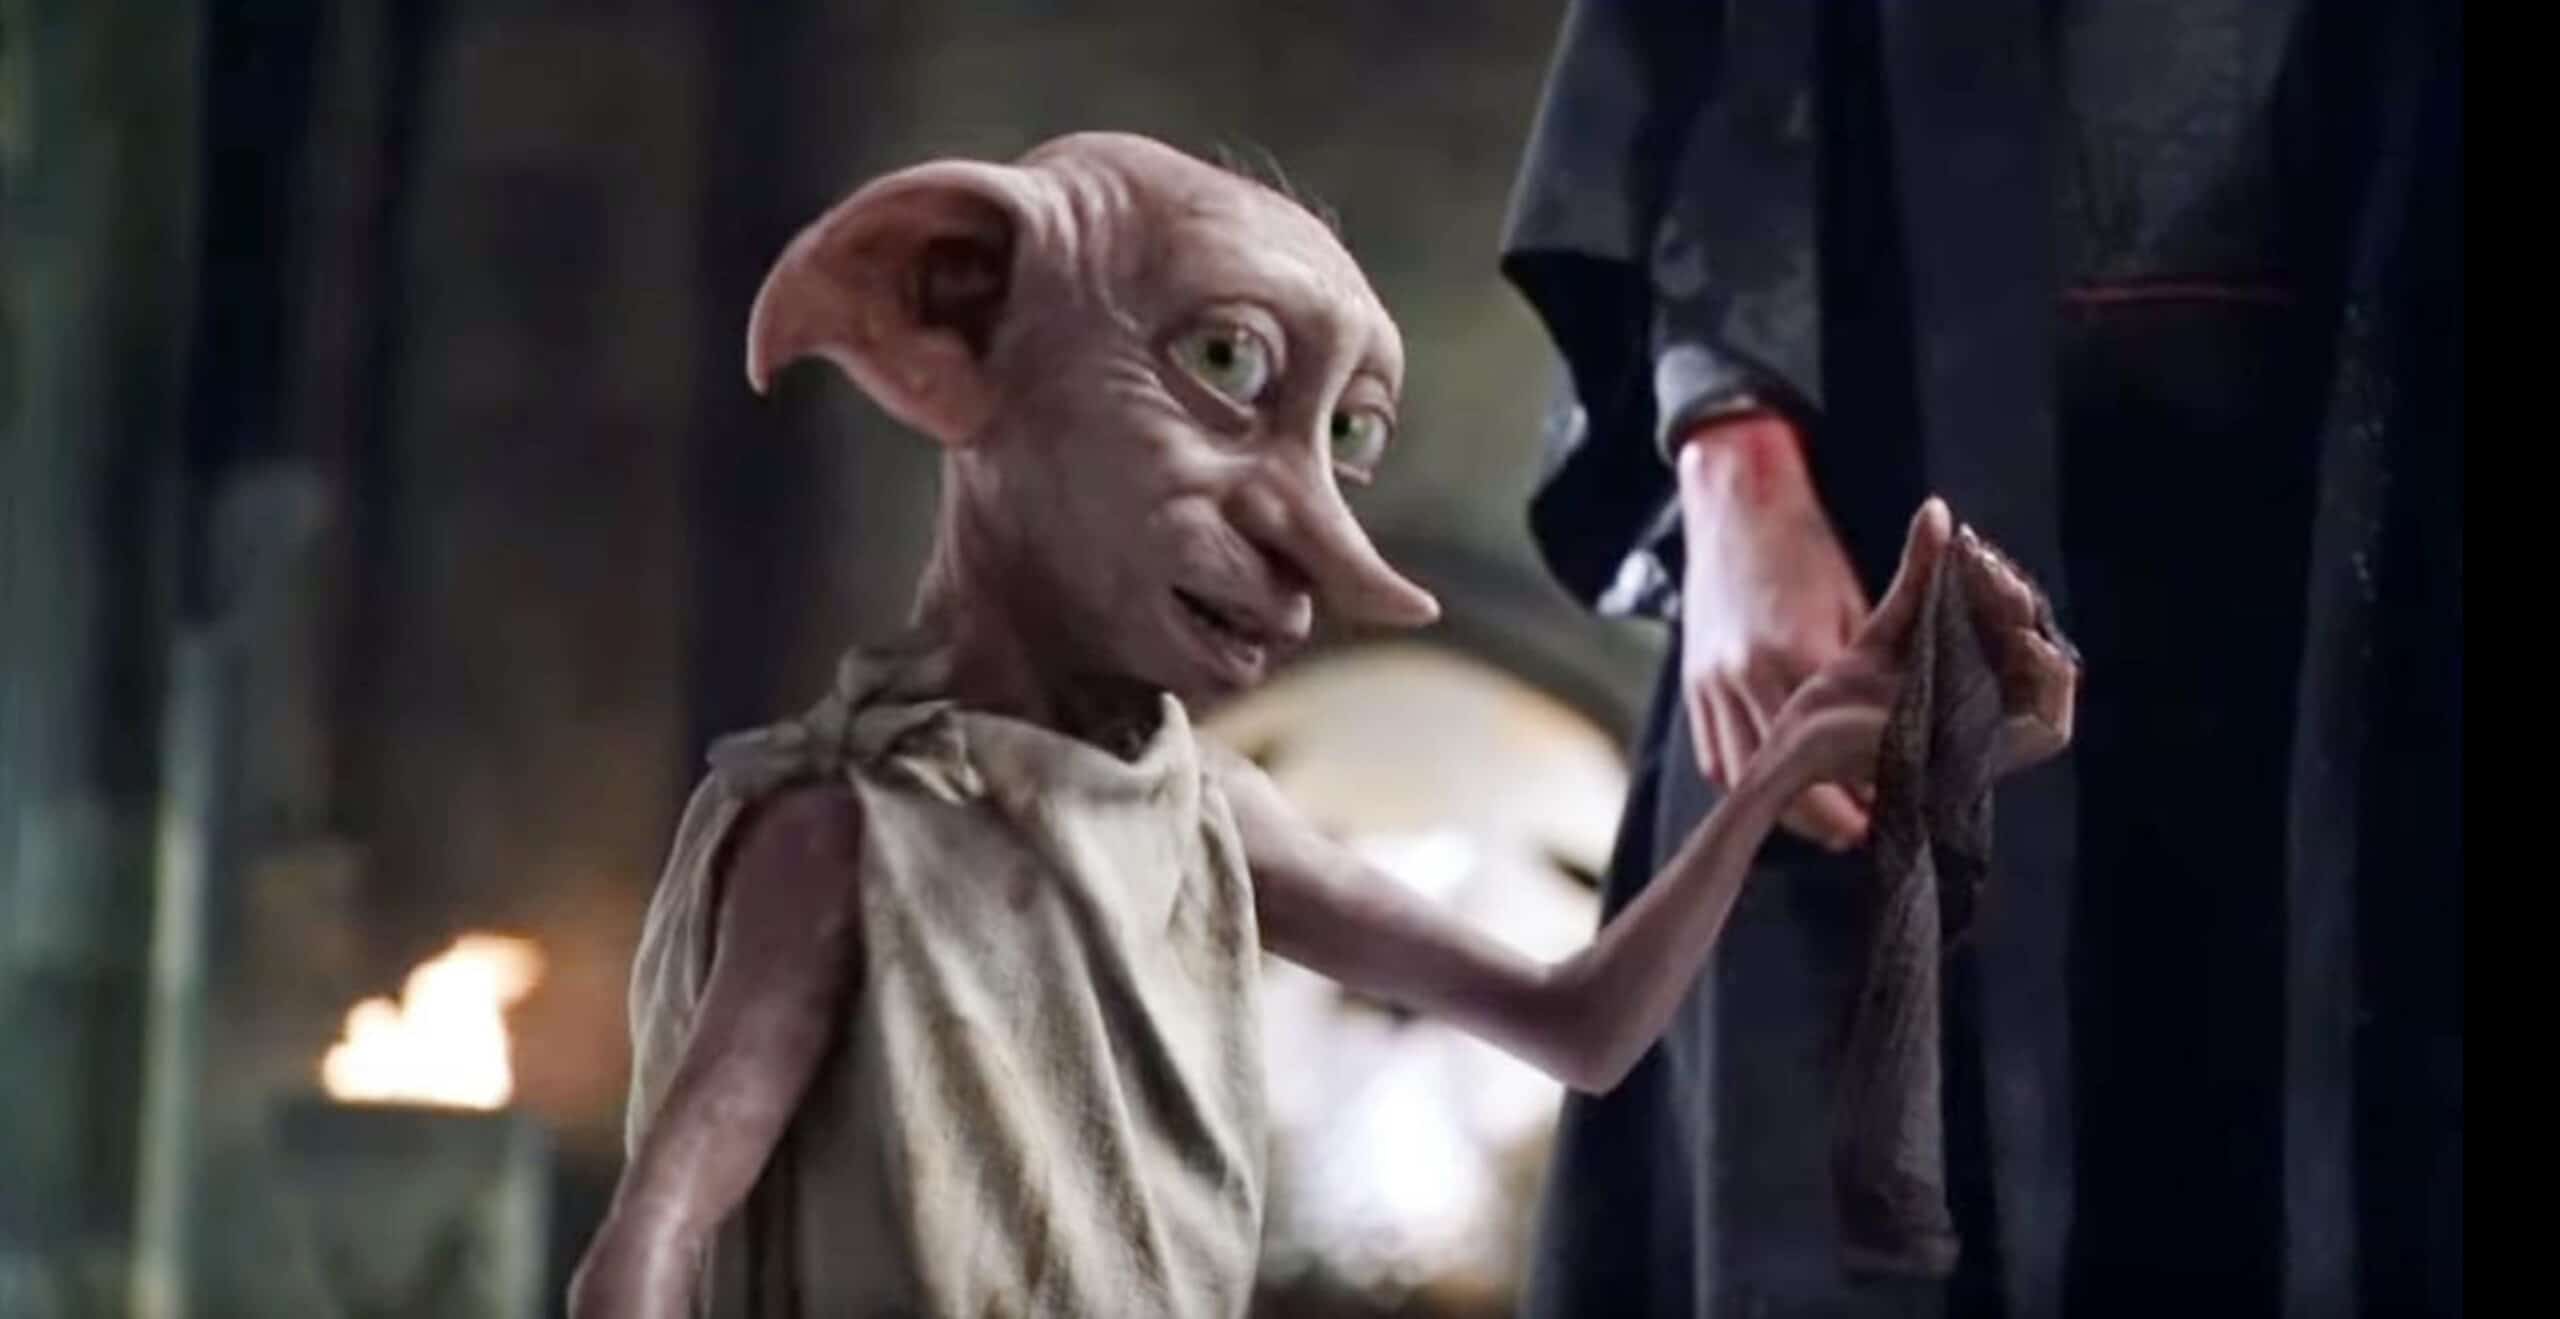 <ul> <li><strong>Who said it:</strong> Dobby the House Elf</li> <li><strong>Played by:</strong> Toby Jones</li> <li><strong>Movie:</strong> Harry Potter and Chamber of Secrets (2002)</li> </ul> <p>Dobby the house elf is an iconic character in the Harry Potter series who brings to light how terribly house elves are treated. It's a powerful and emotional line when Dobby realizes that he no longer has to serve his master after Harry sneaks a sock into Lucius Malfoy's book. In the series, house elves are freed when their master gives them an item of clothing.</p>